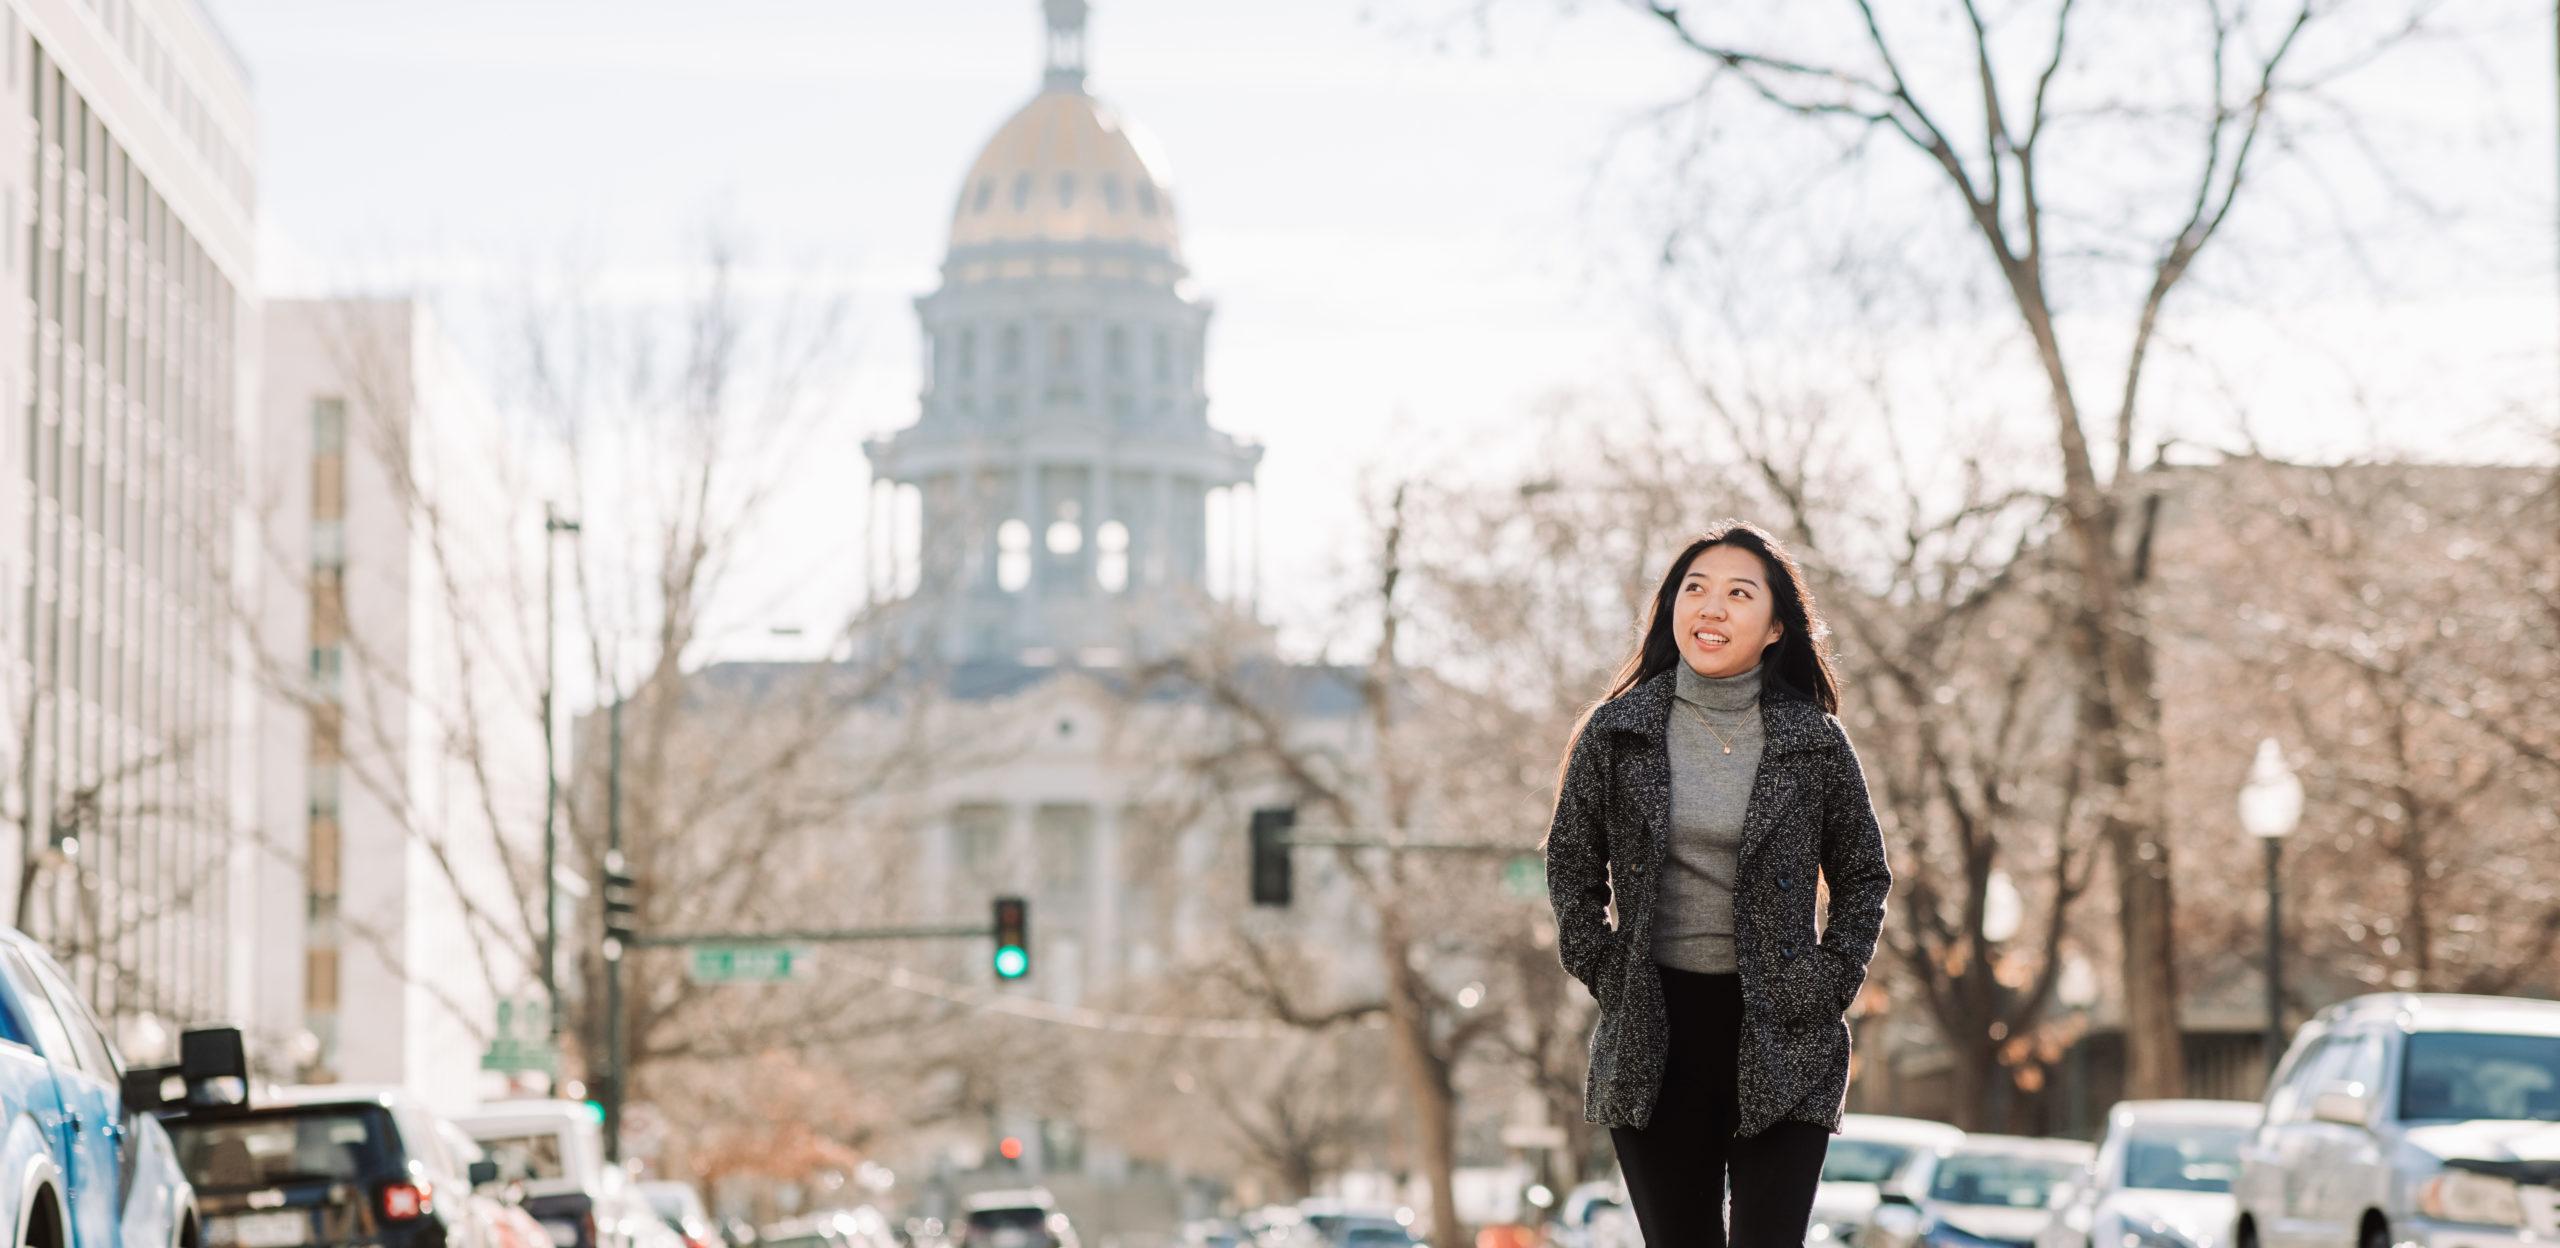 Li Chen Chen, an English major at MSU Denver, is among six students selected for a new internship focused on public service.